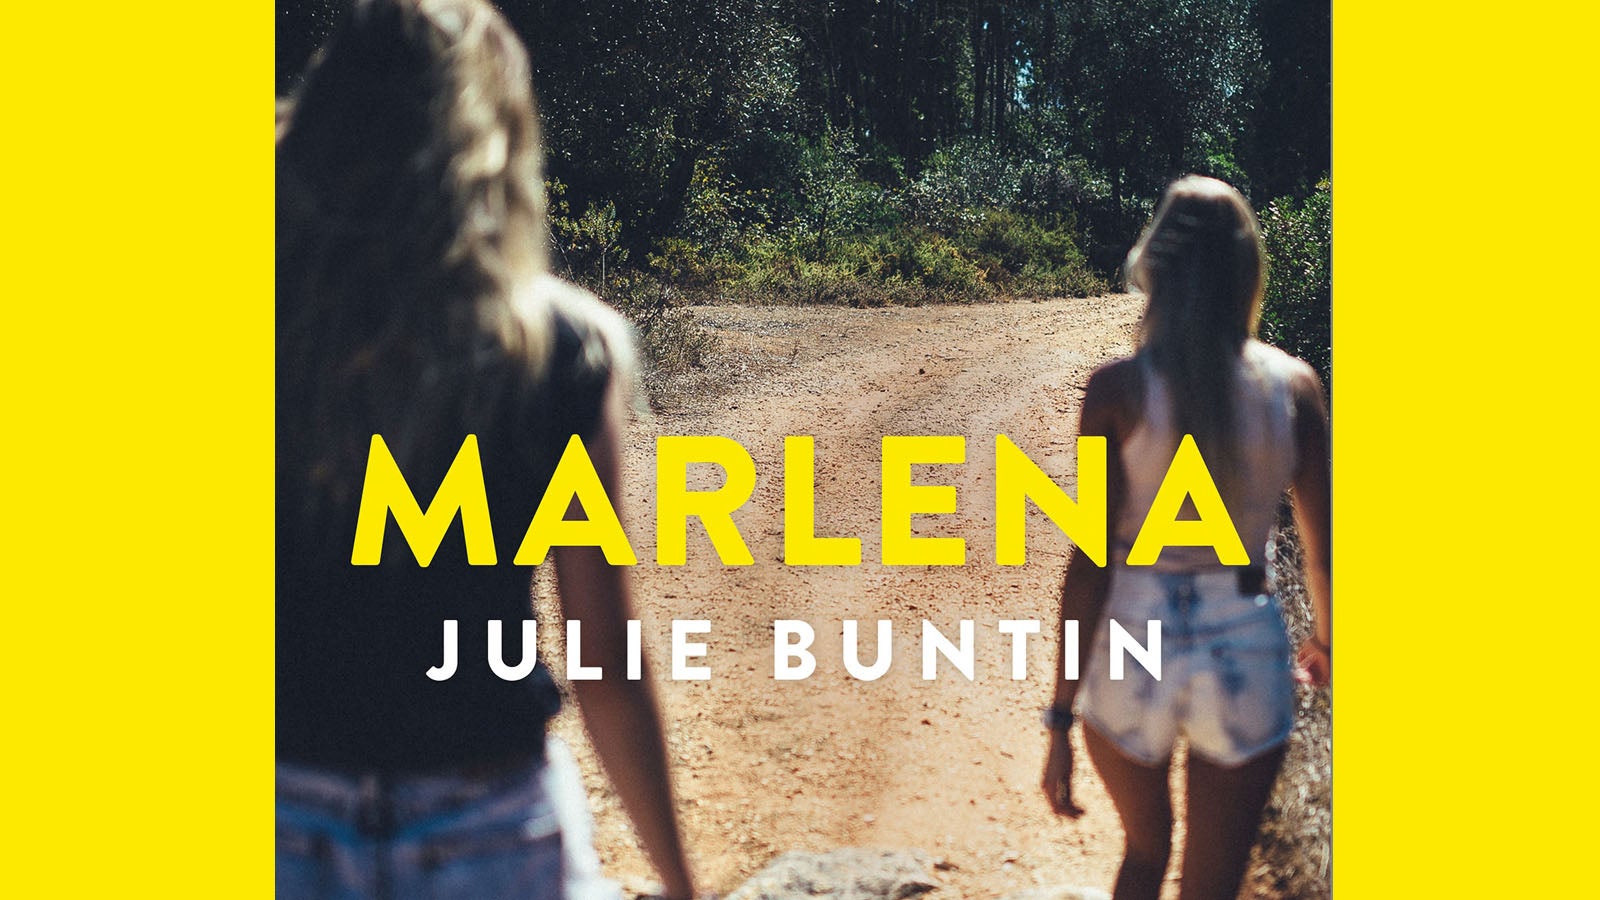 Jacket cover for the book Marlena by Julie Buntin, depicting two girls walking down a dirt road